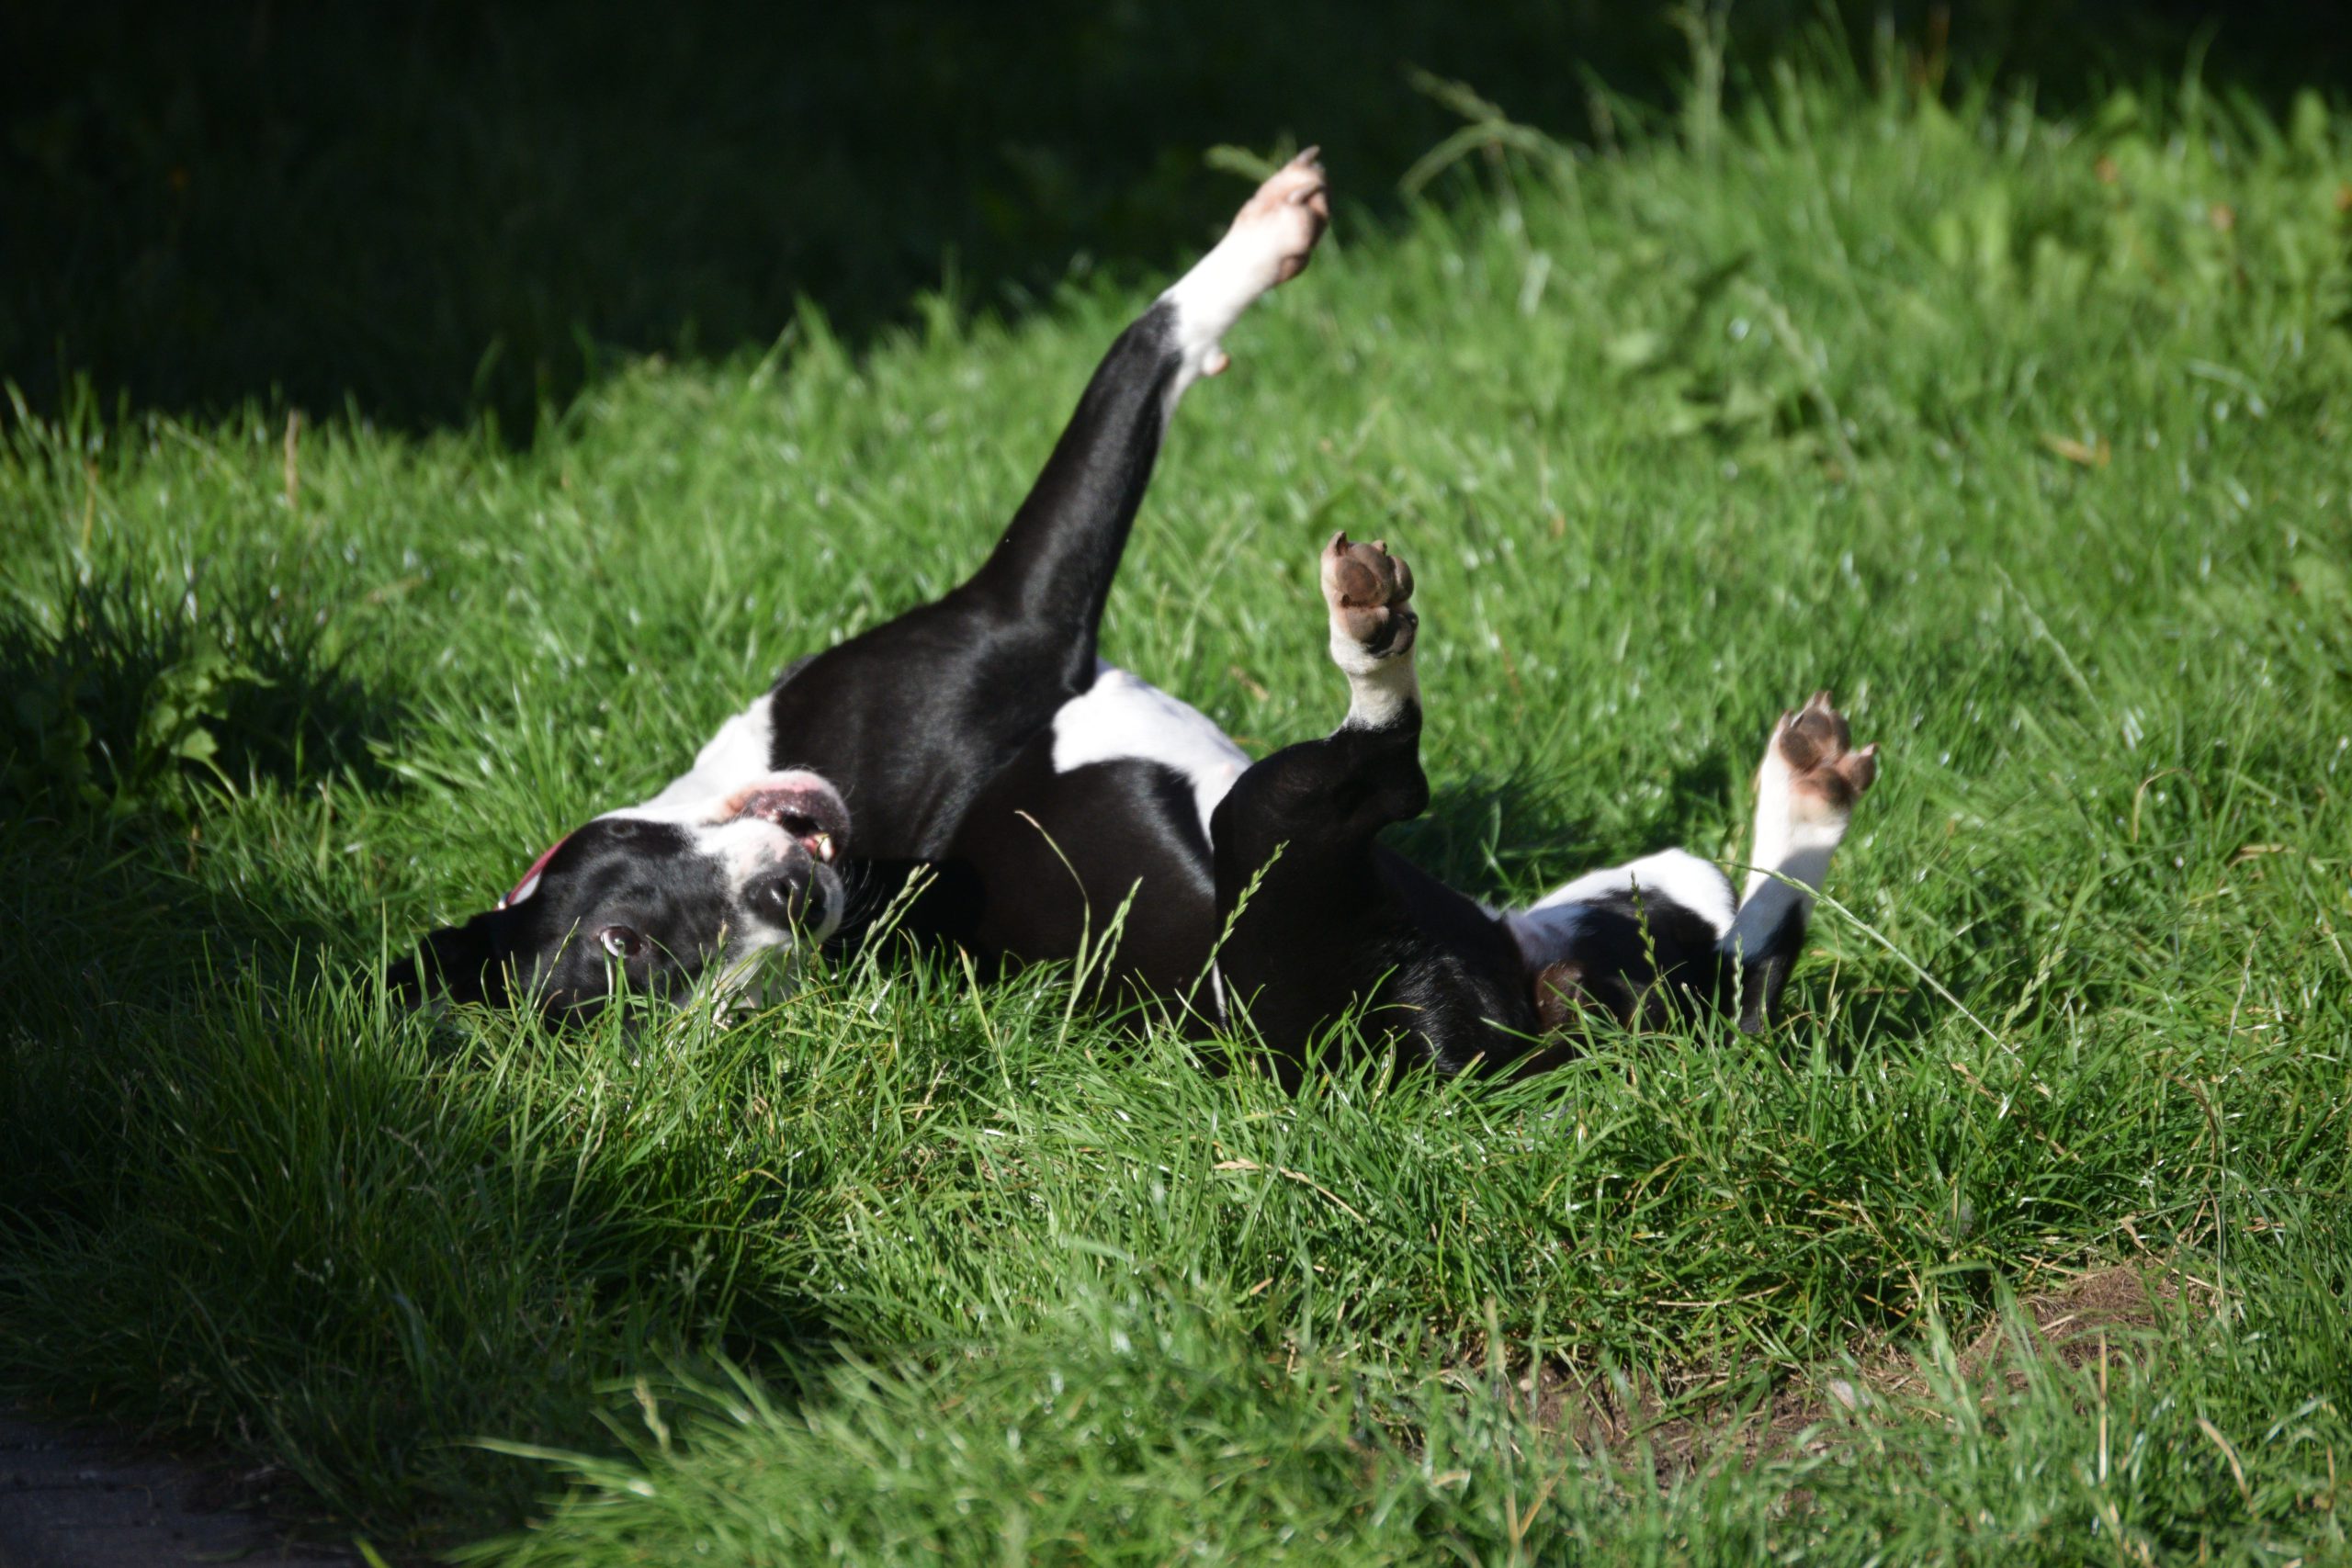 A black and white dog rolling on her back on some green grass in a sun puddle